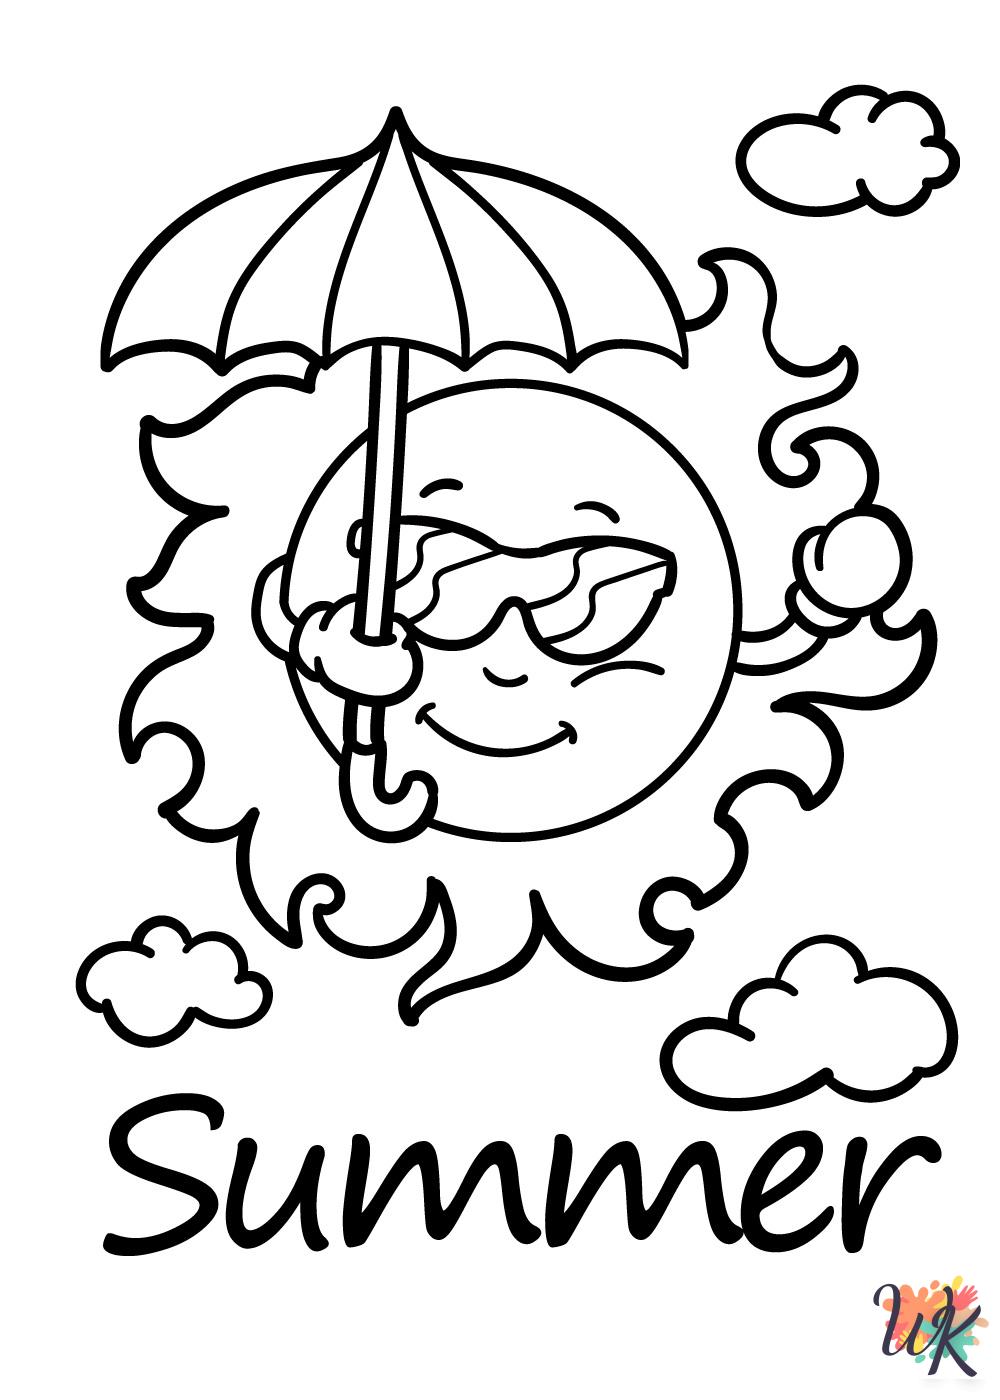 Summer adult coloring pages